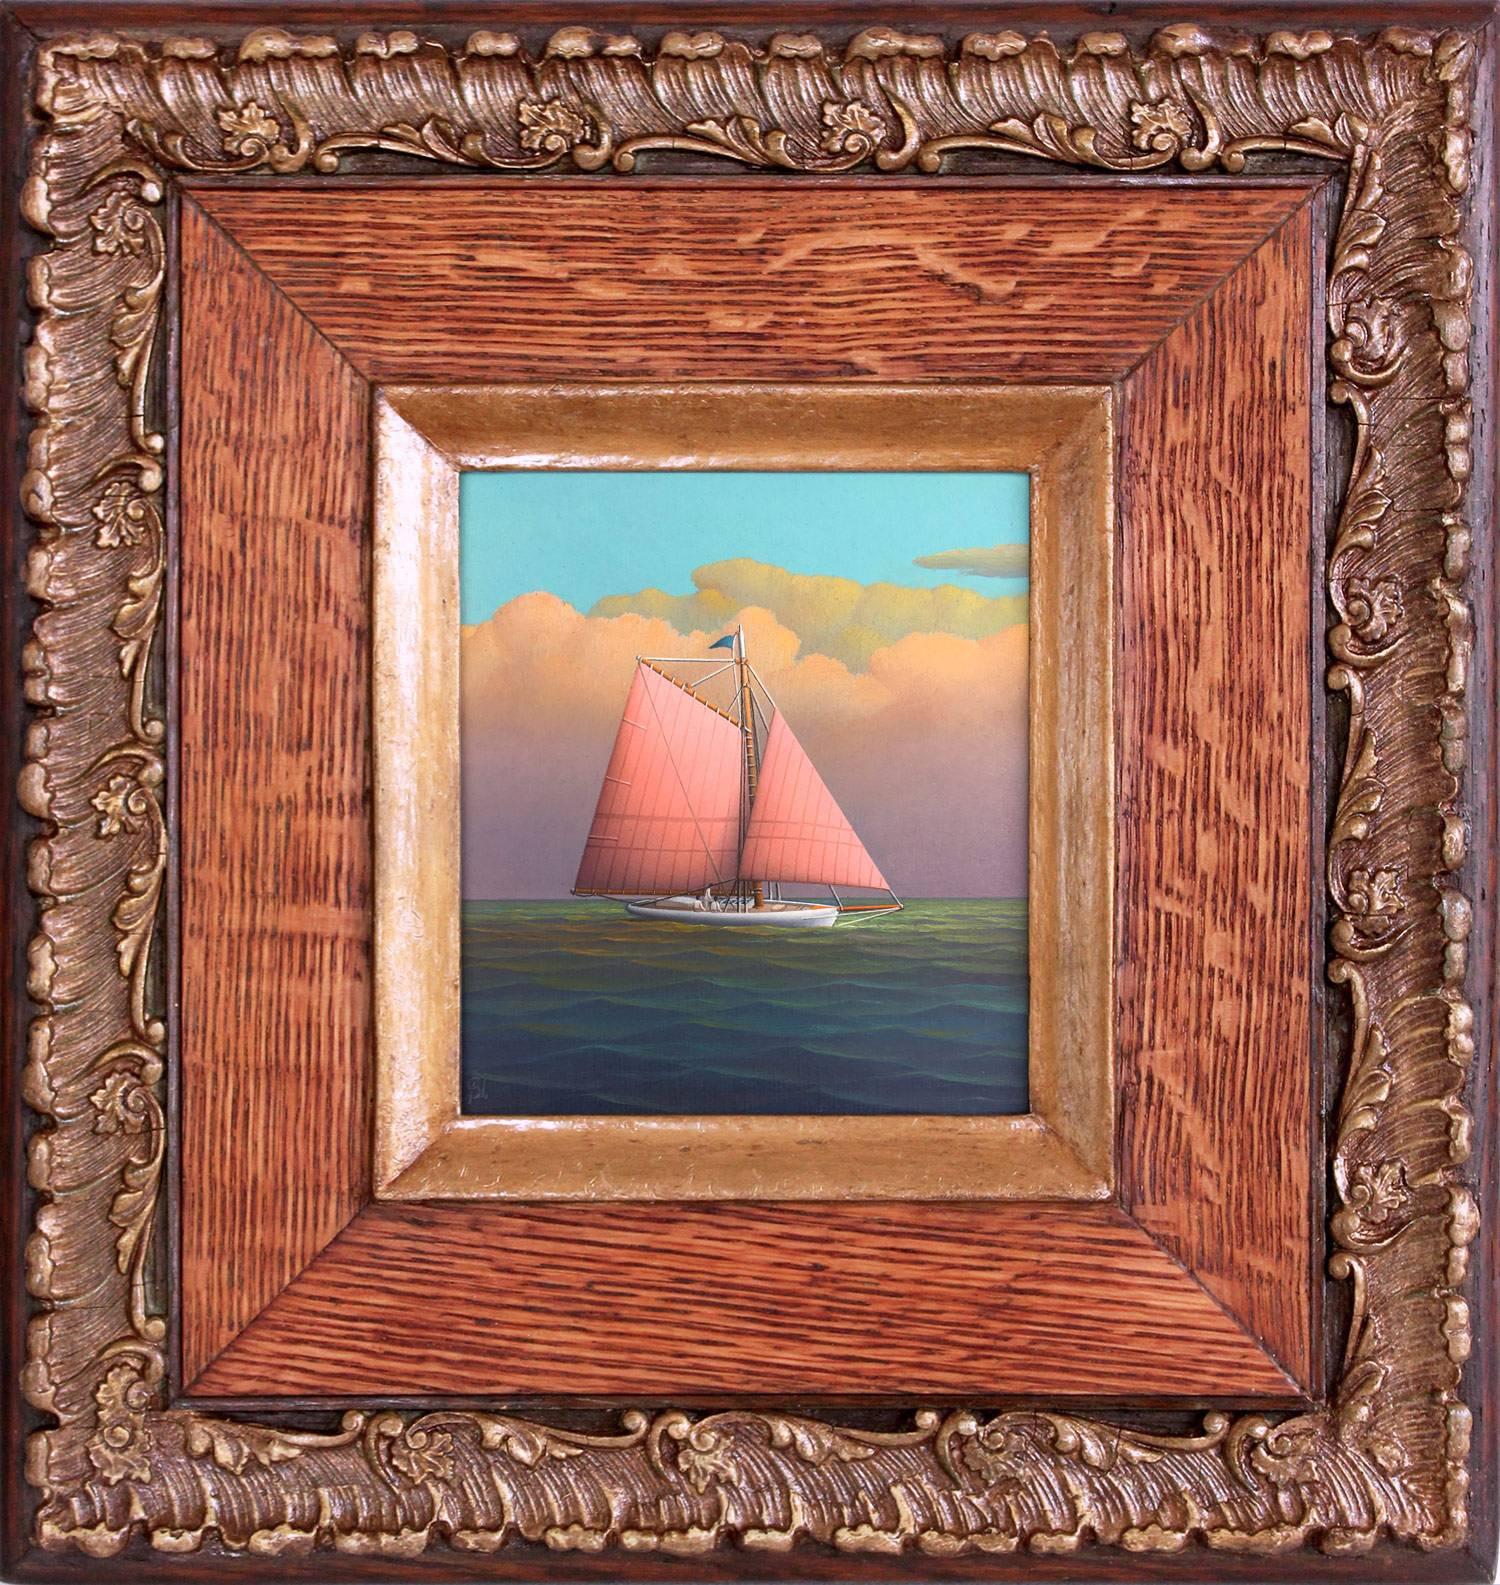 "Tranquil Sailing" Realist Oil Painting on Canvas Board of Sailboat in Open Sea